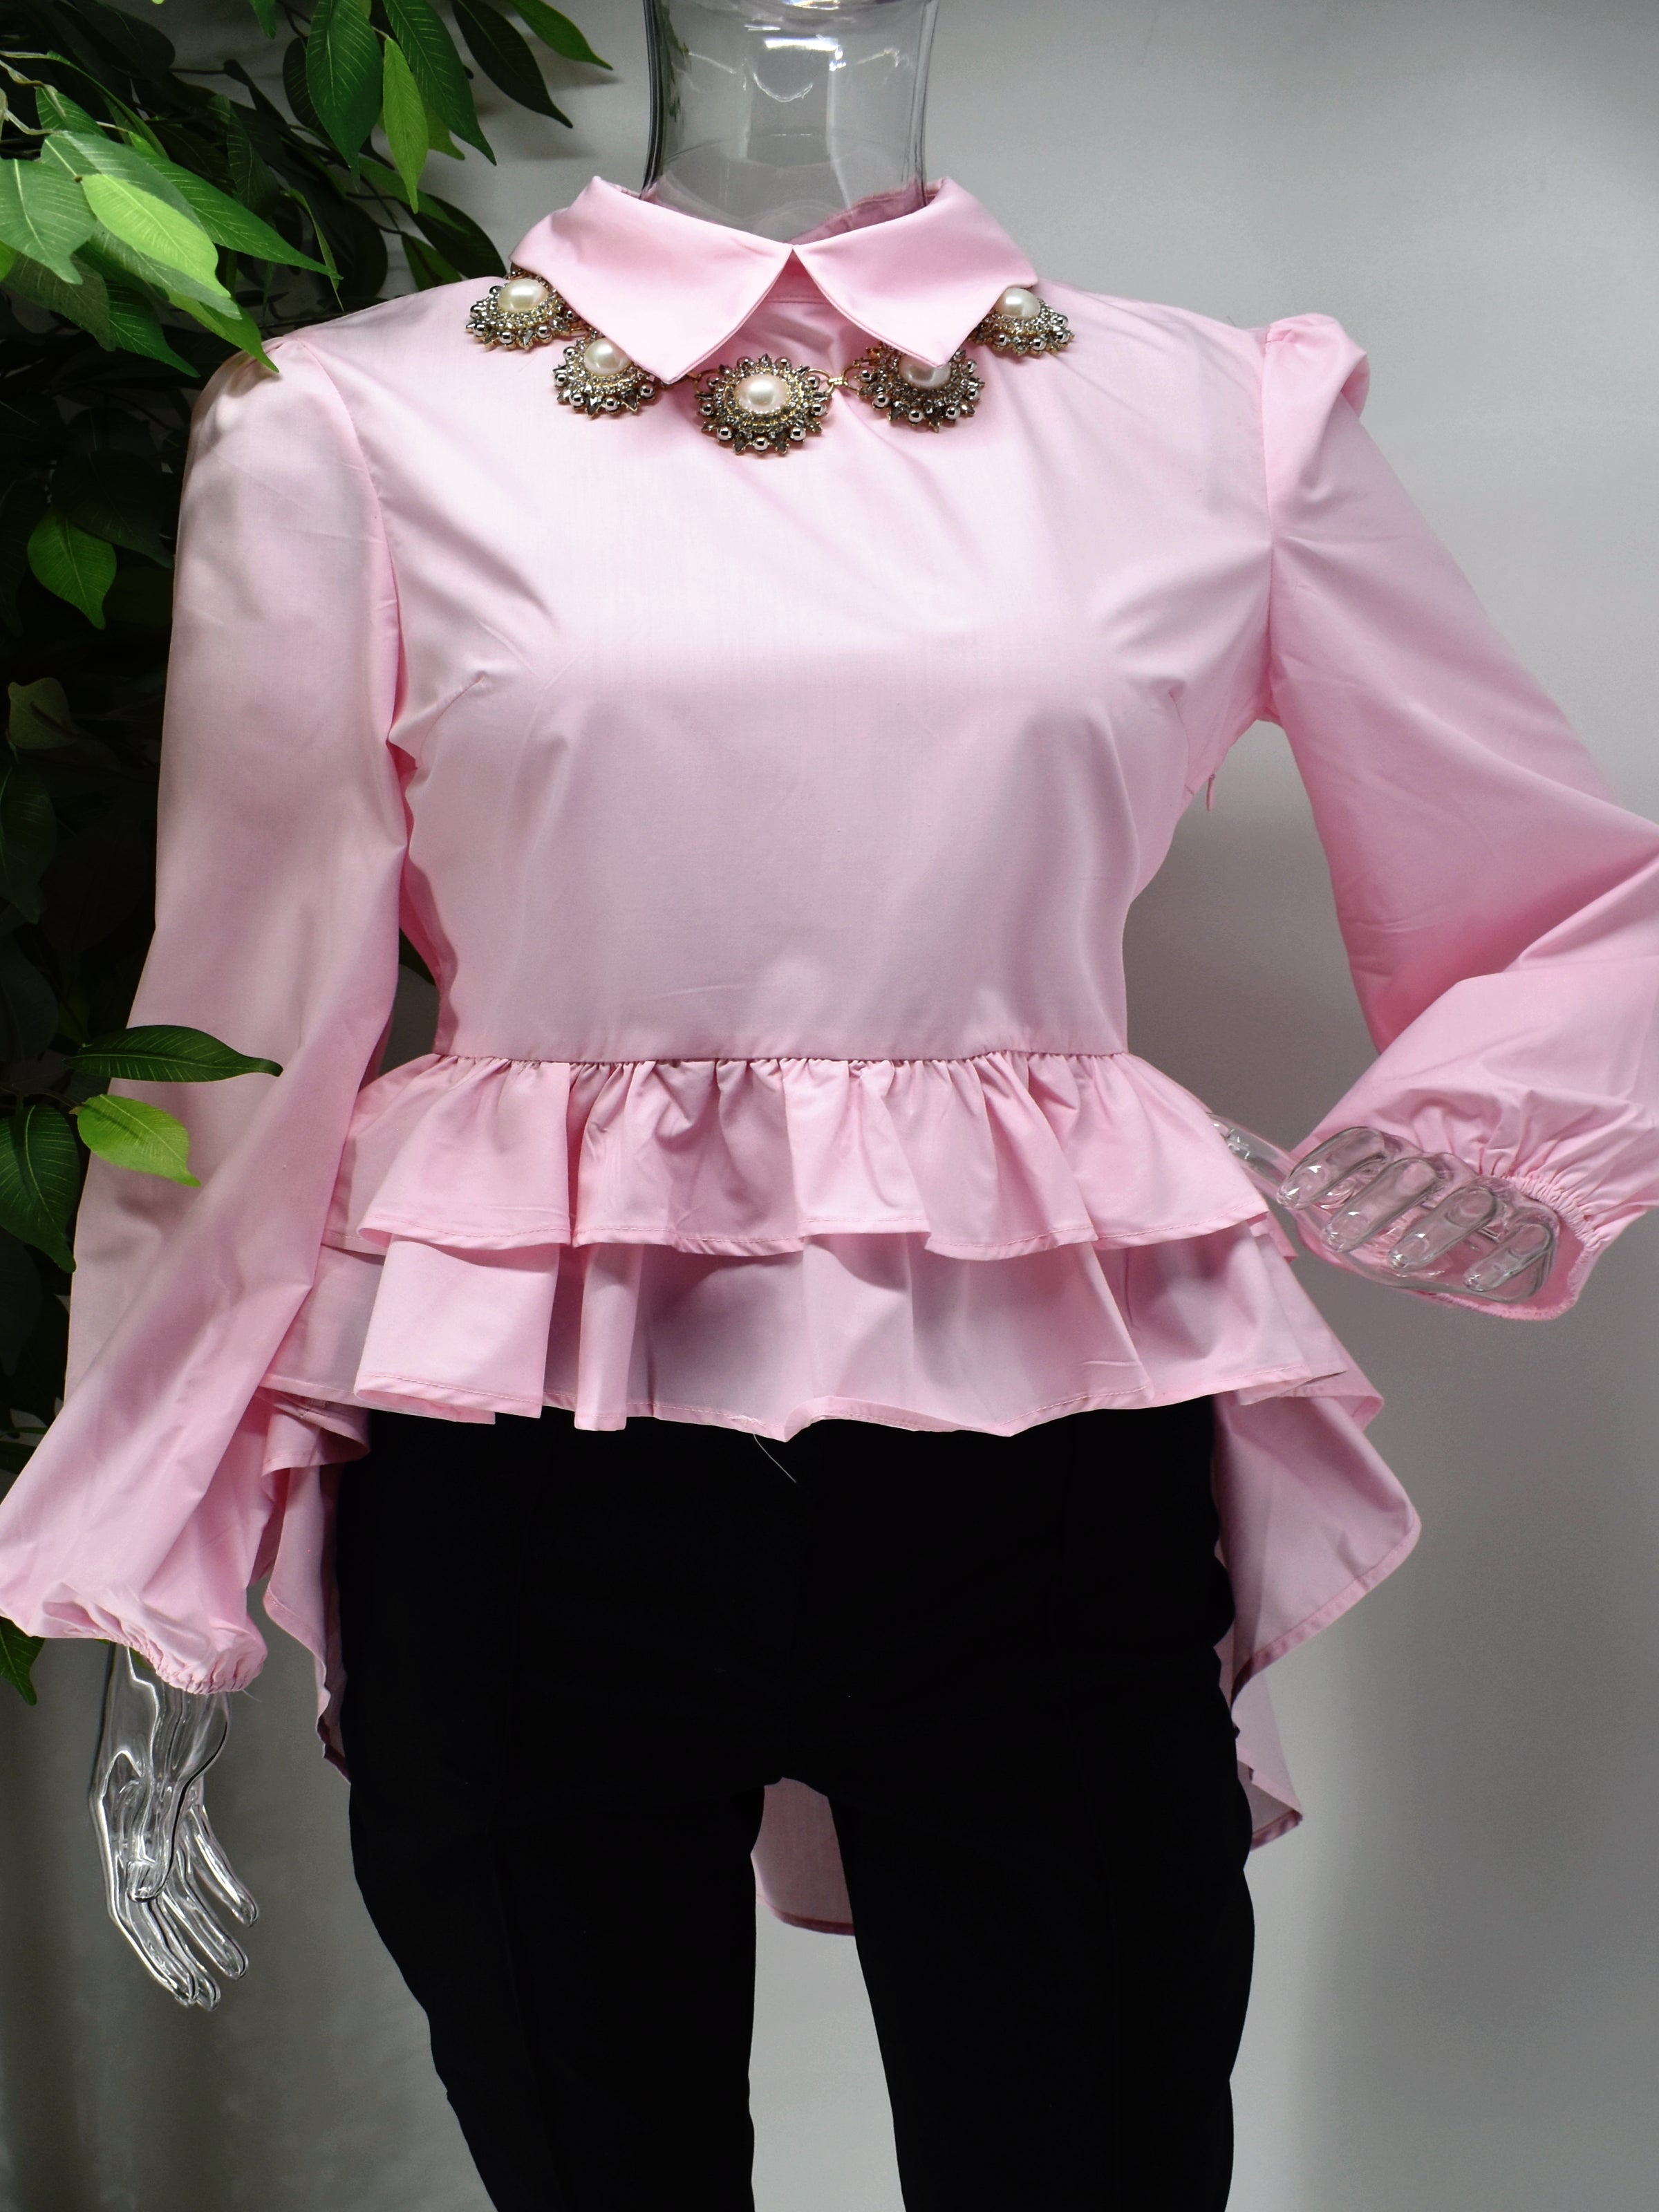 Fashion forward yet comfortably chic is what our Brier pink shirt Blouse will deliver.  Brier is a pink shirt blouse with a ruffled peplum waistline with the back hem longer than the front. 